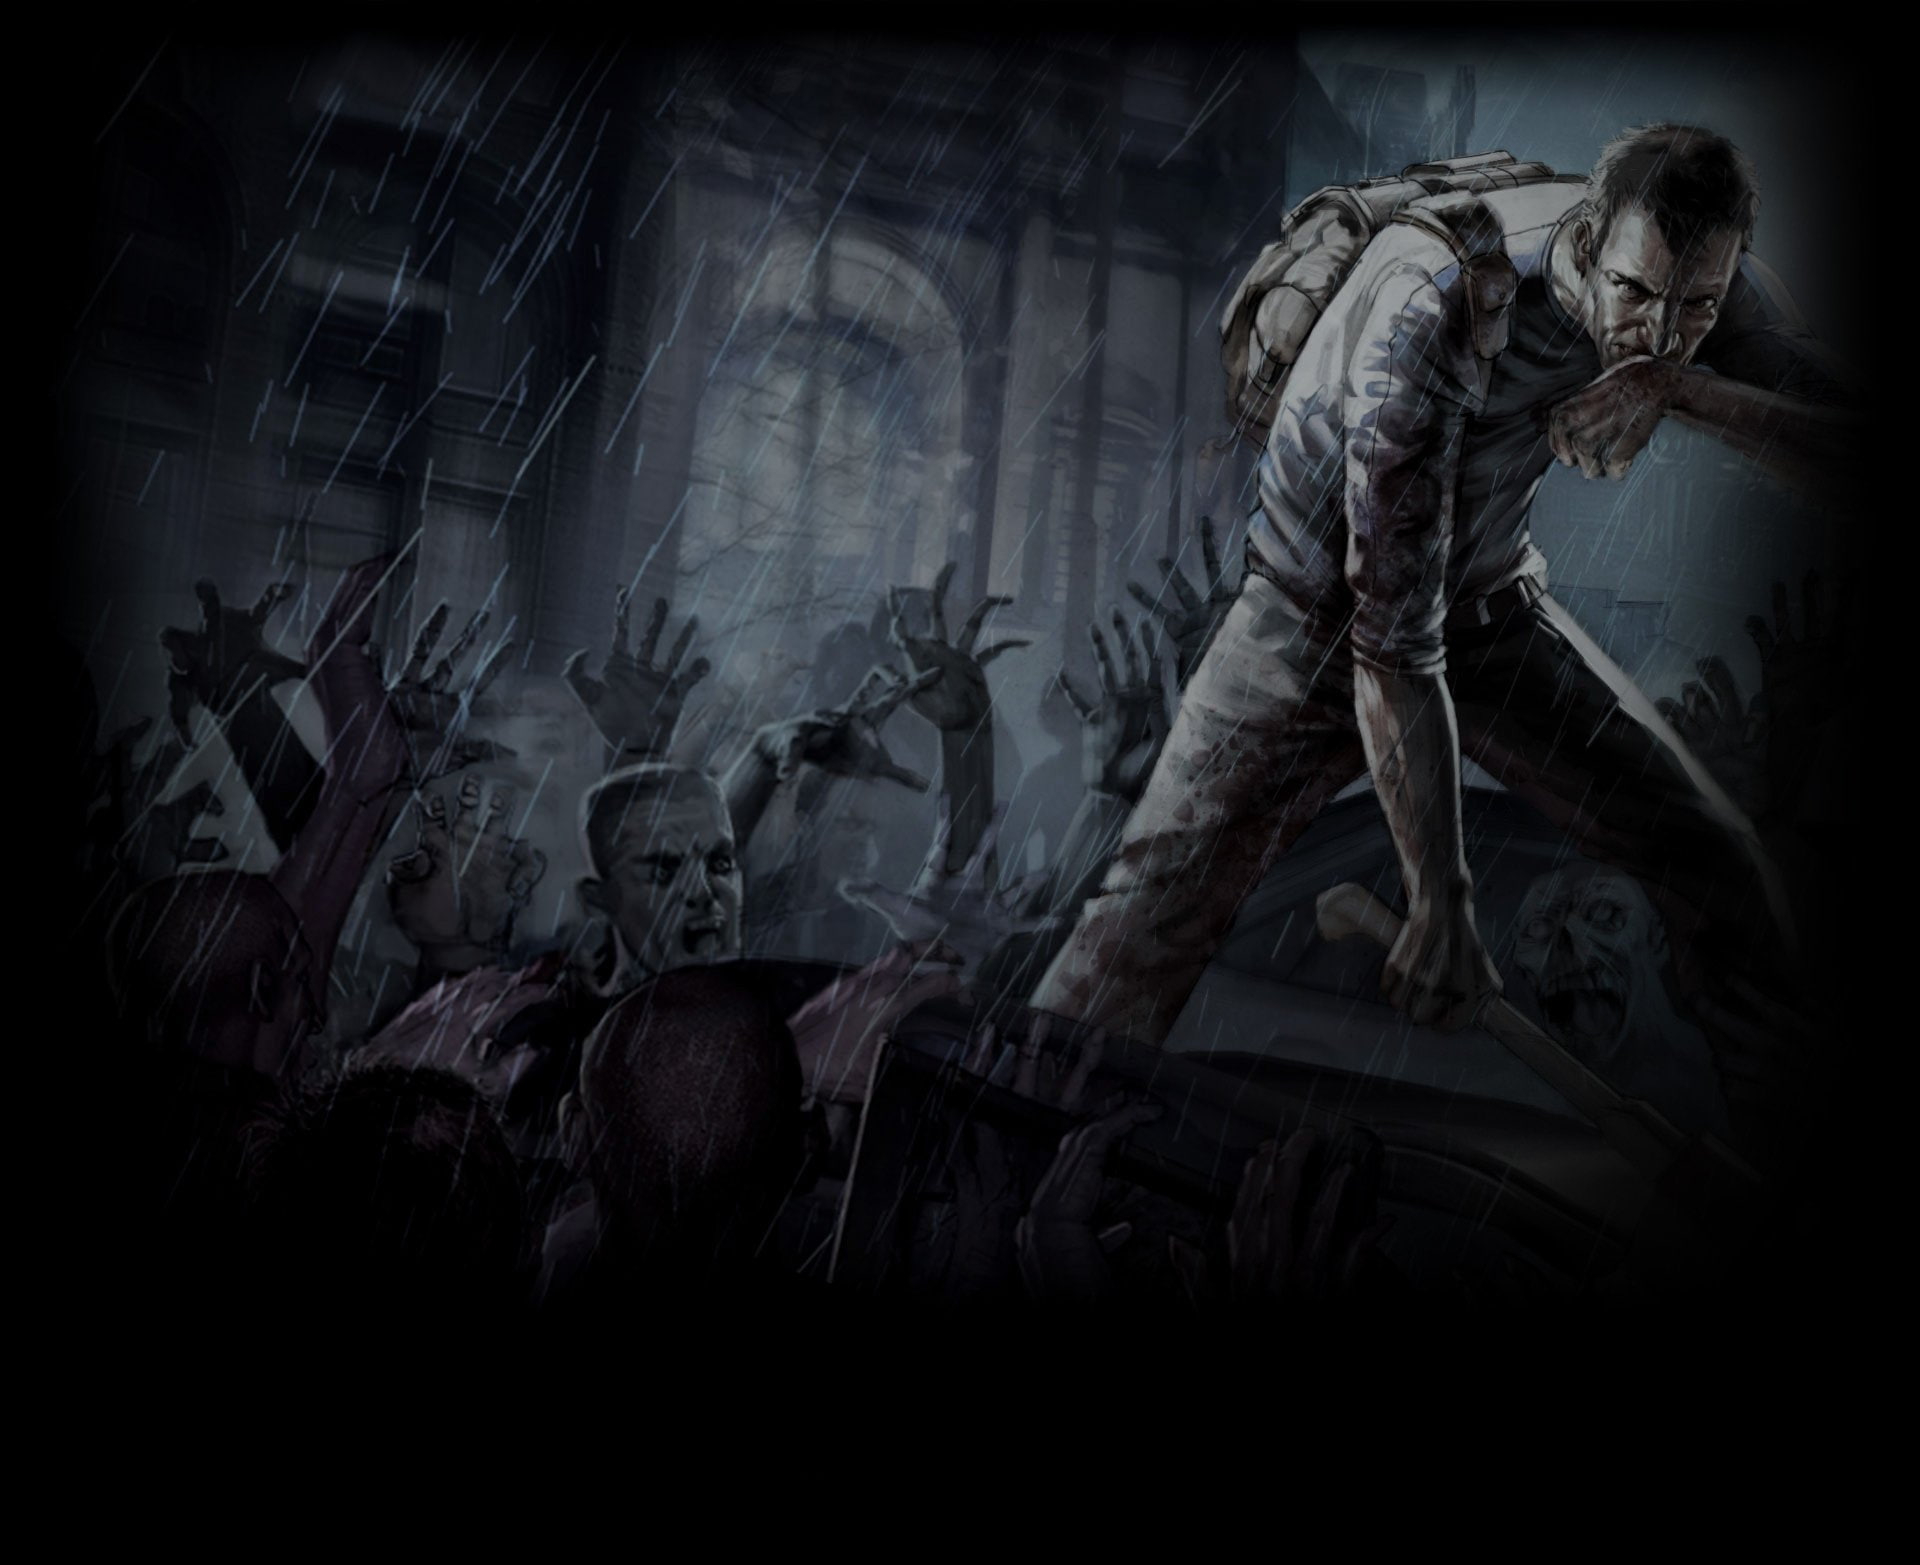 Wallpaper Video Game Project Zomboid, Project Zomboid Wallpaper, Game